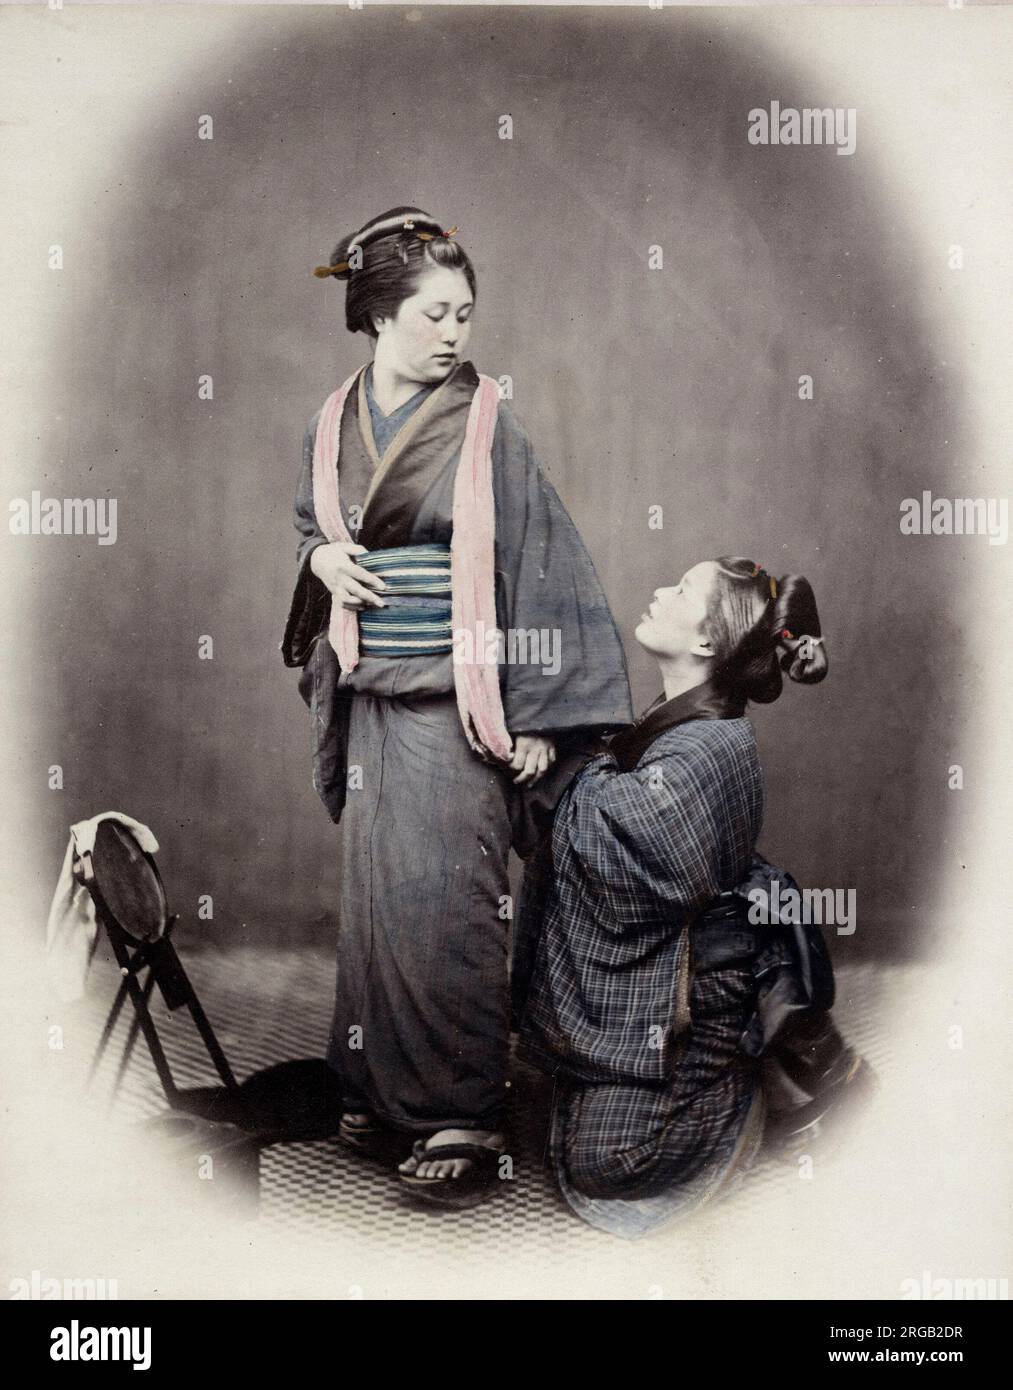 1860's Japan - portrait of a young woman tying her obi sash Felice or Felix Beato (1832 - 29 January 1909),  Italian-British photographer working mostly in India, Japan, China Stock Photo